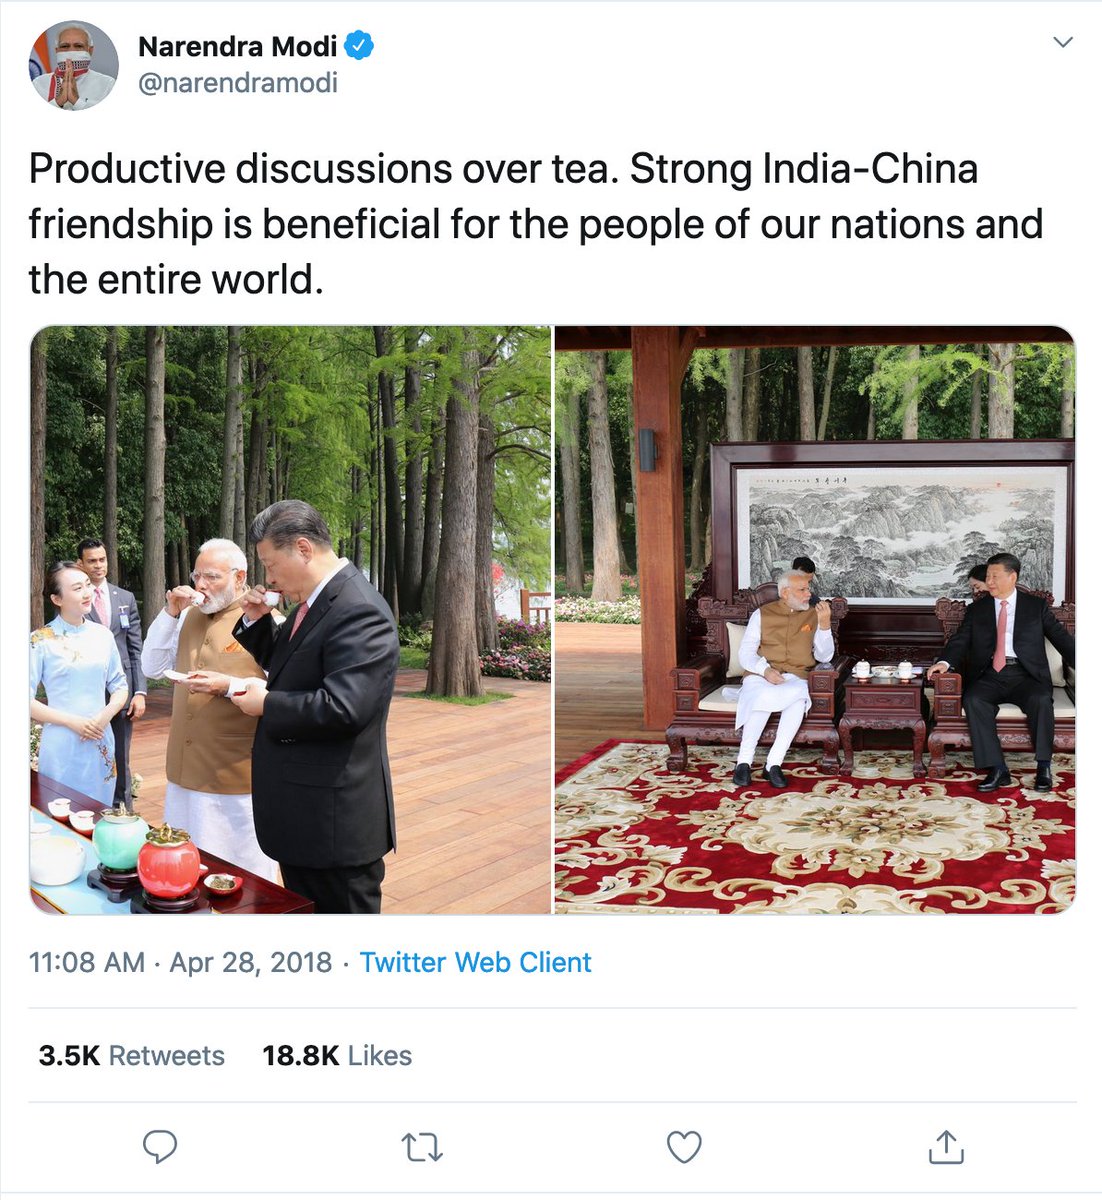 The lesser said about these tweets, is better. I AM NOT AT ALL SHOCKED BY THE BONHOMIE BETWEEN BJP AND CPC. After all, BJP and RSS have a history of always getting in bed with the forces that are inimical towards India and its people.𝐒𝐩𝐫𝐞𝐚𝐝 𝐚𝐧𝐝 𝐒𝐡𝐚𝐫𝐞!8/8